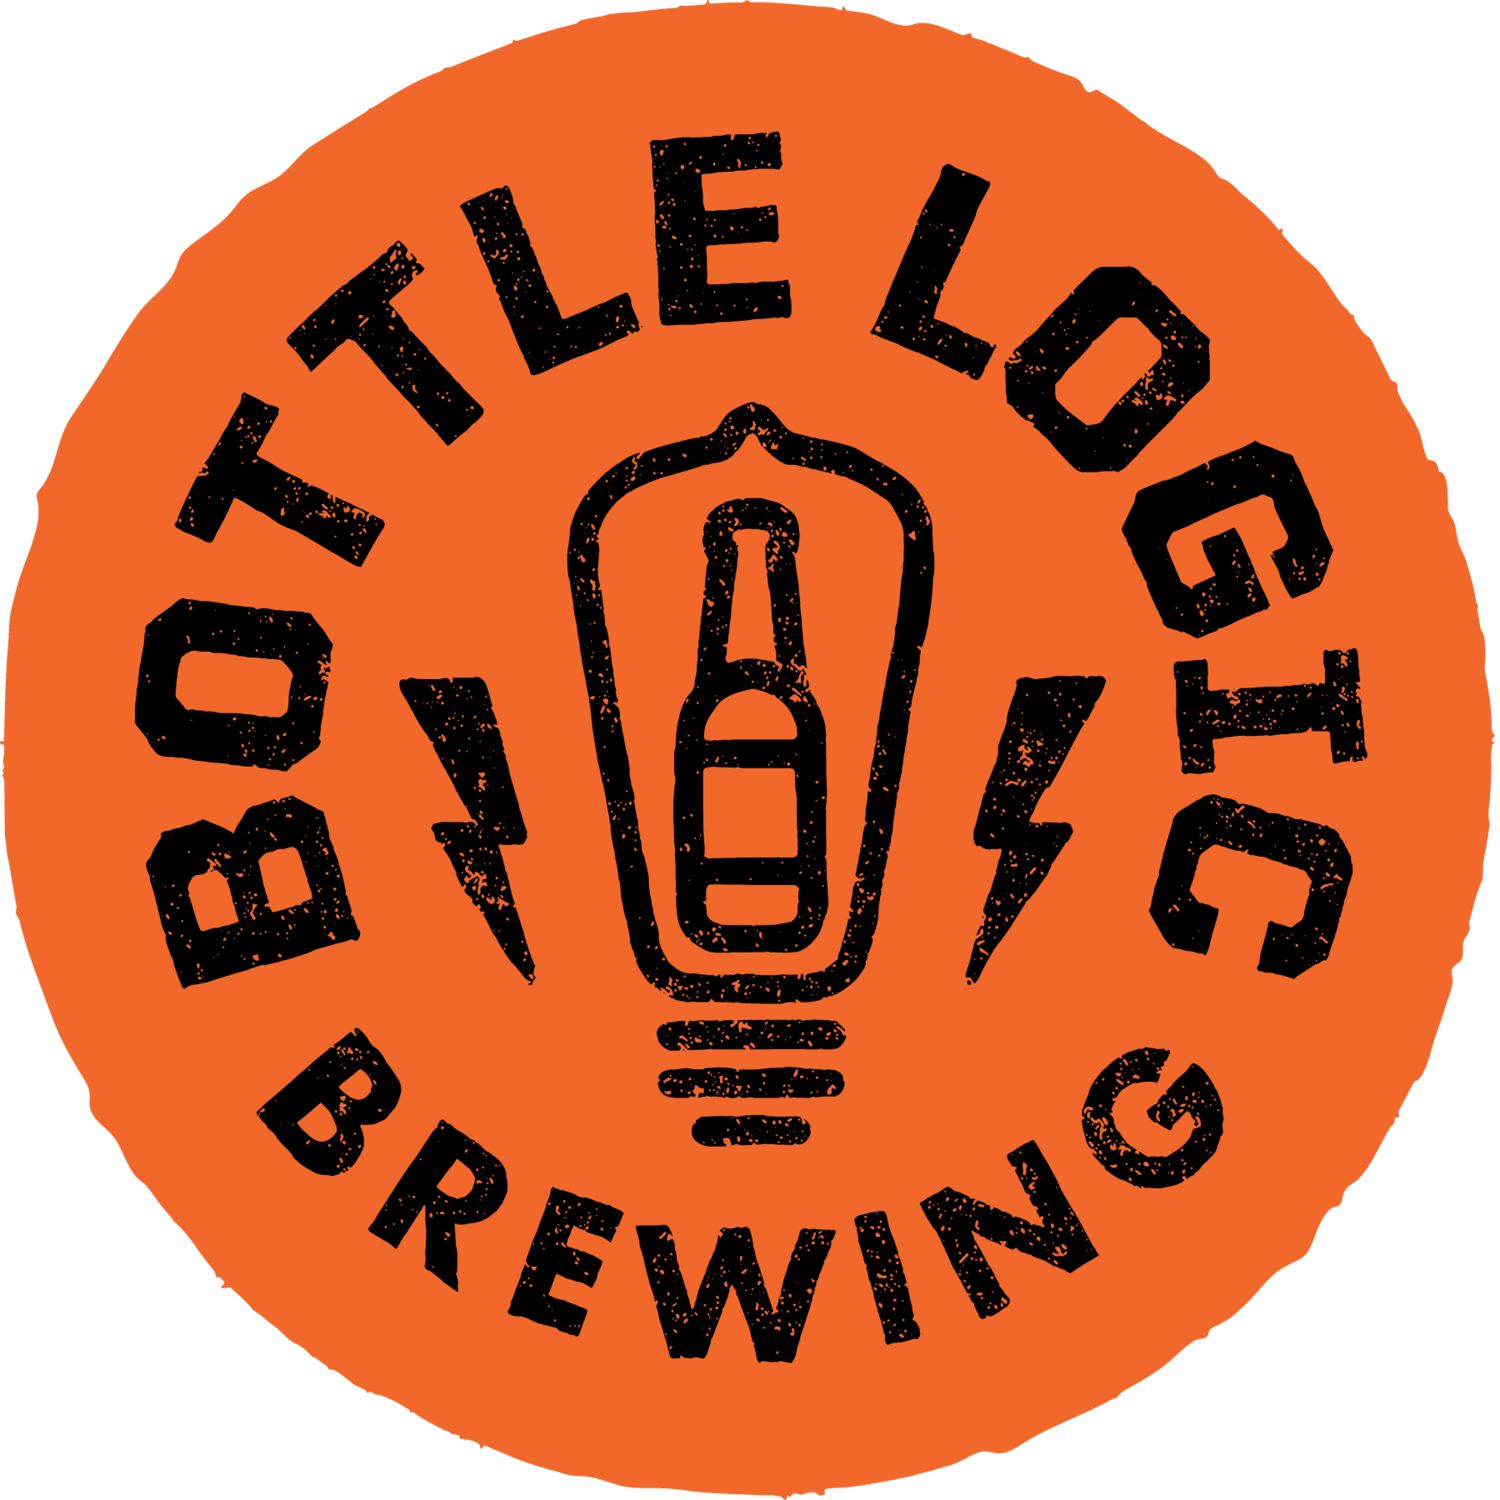 BottleLogic_2020_SpicyMeatball_Distressed_165_BLK.png__PID:9c3bc622-8e05-4bf8-9418-d5eaa2c14321